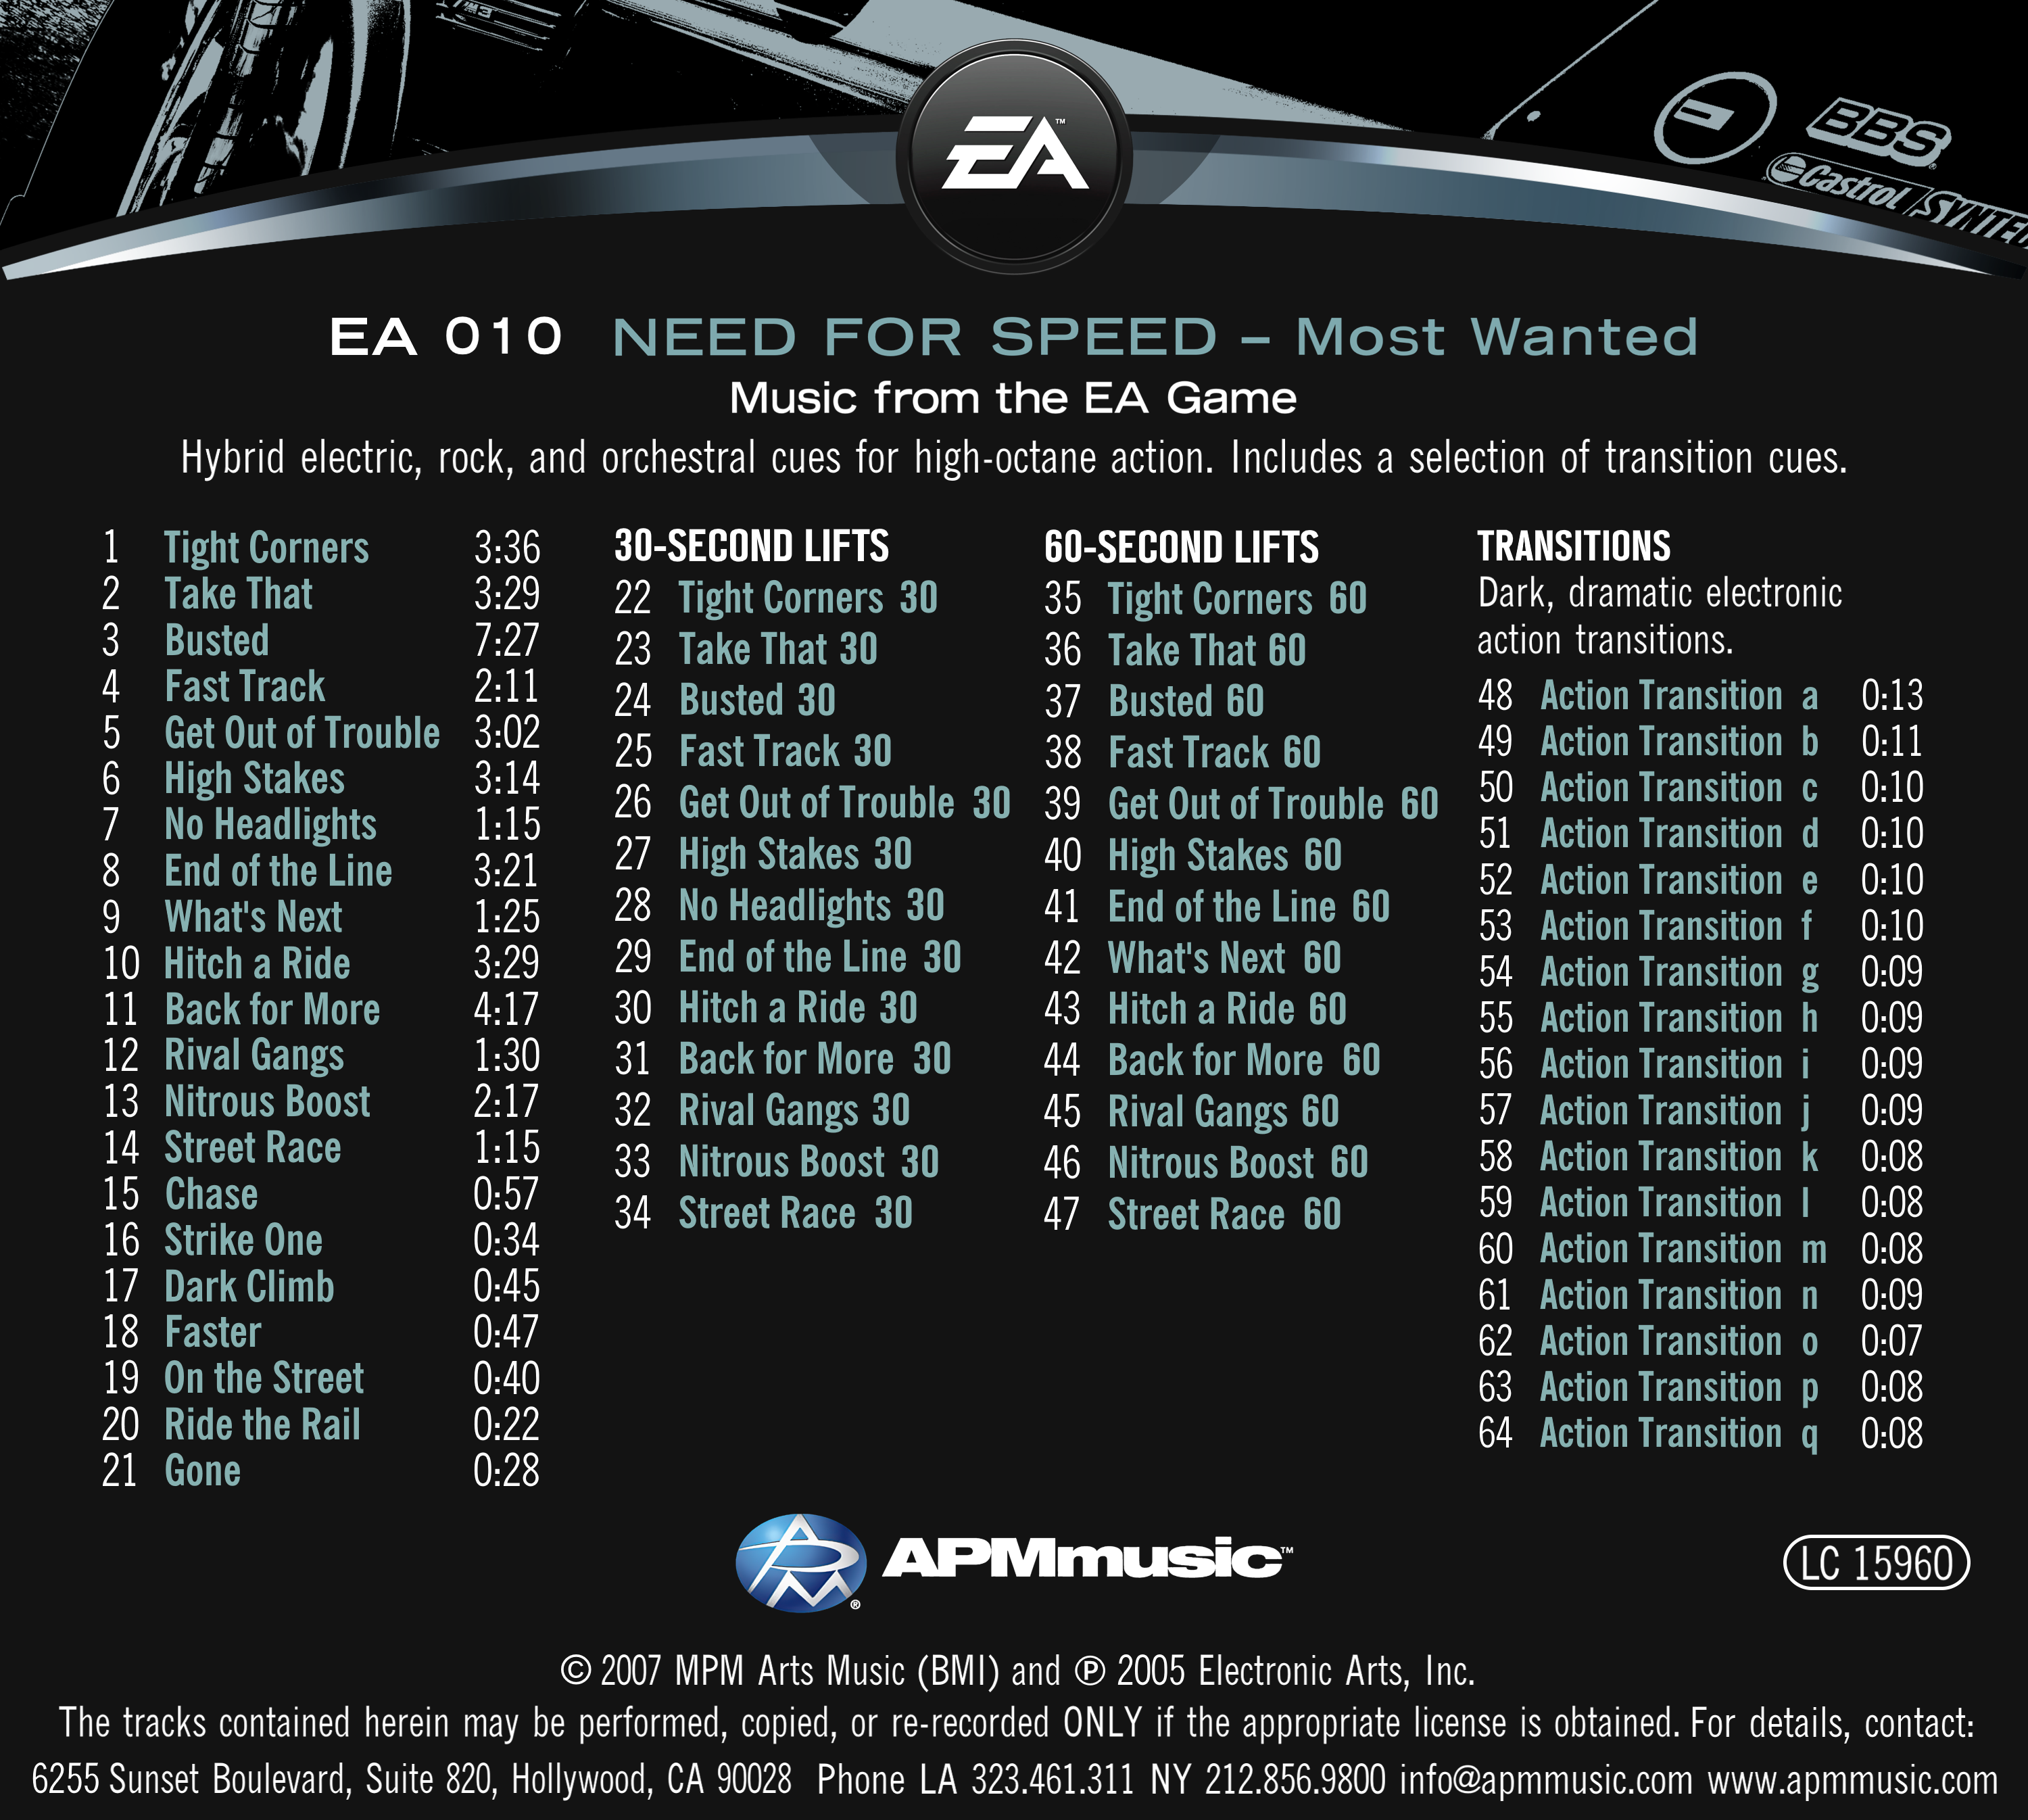 nfs most wanted sound track